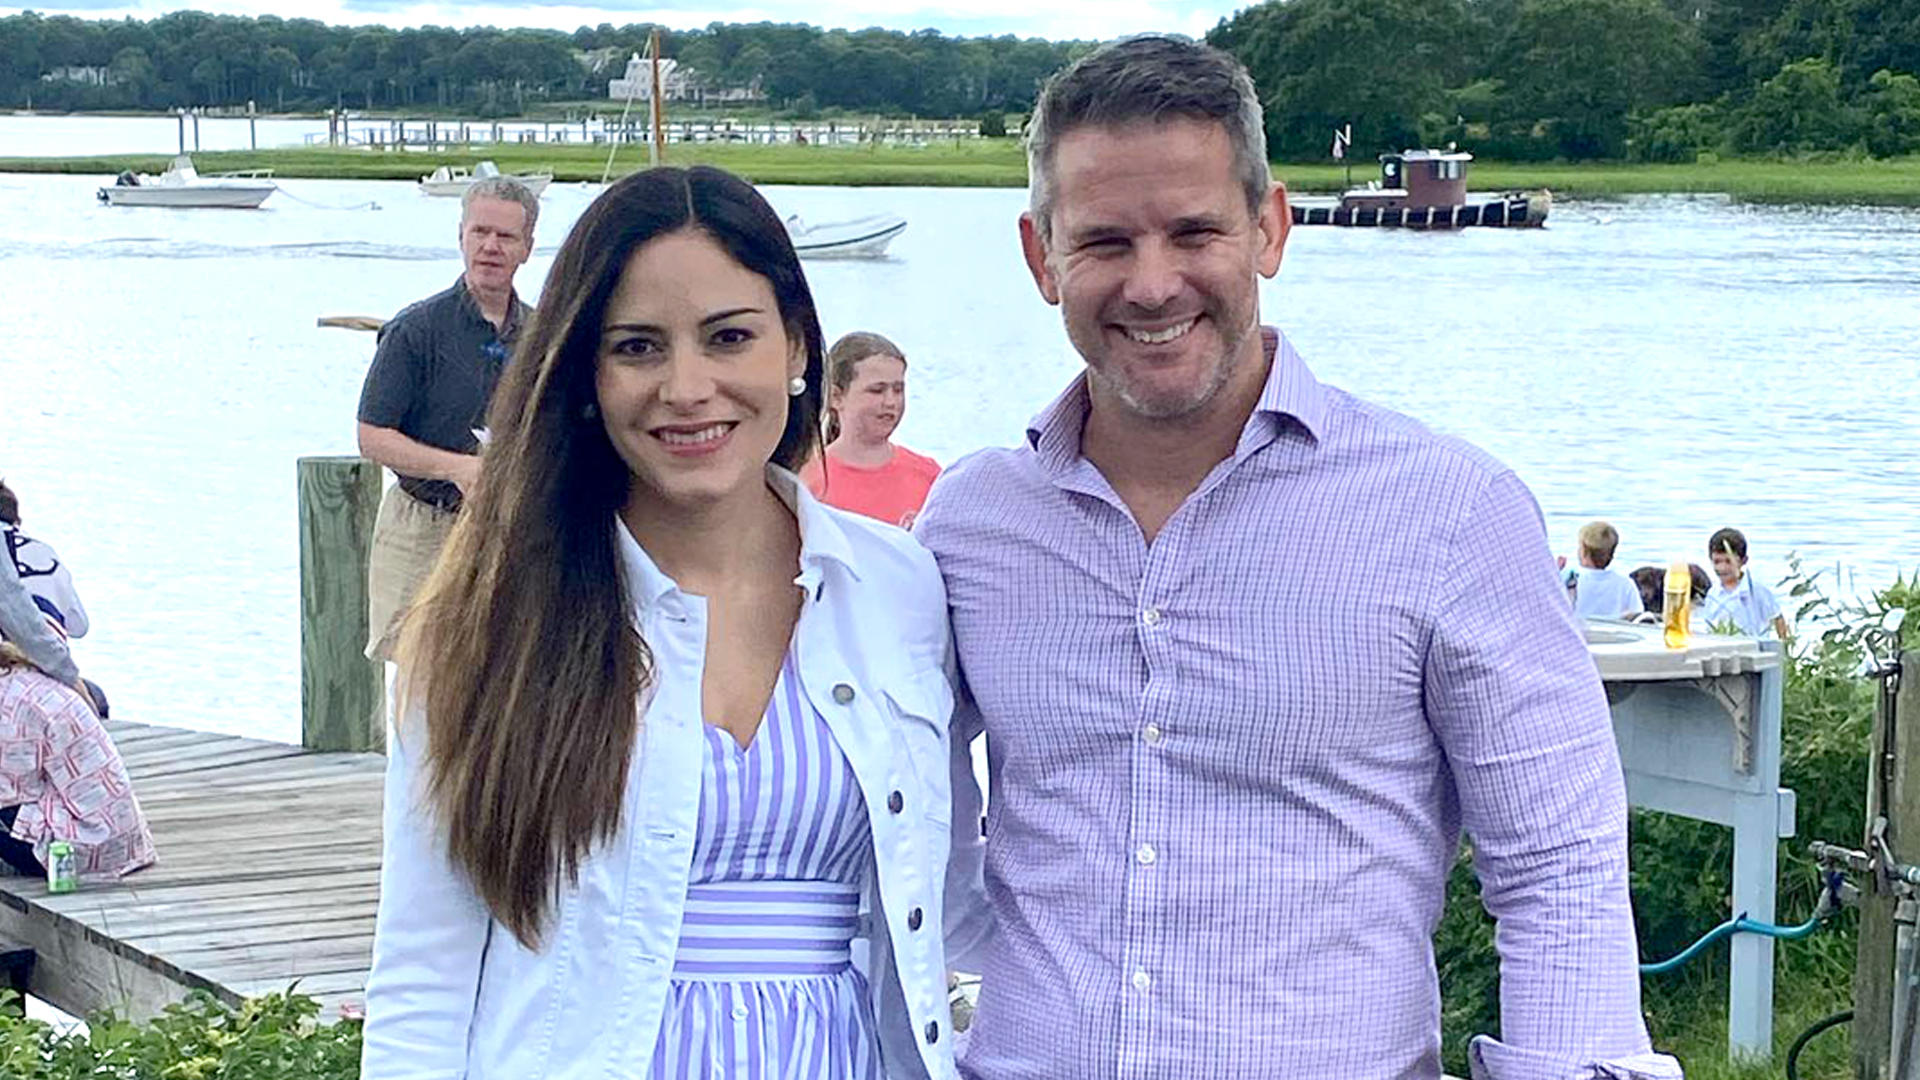 Inside Rep Adam Kinzinger's marriage after wife Sofia received chilling